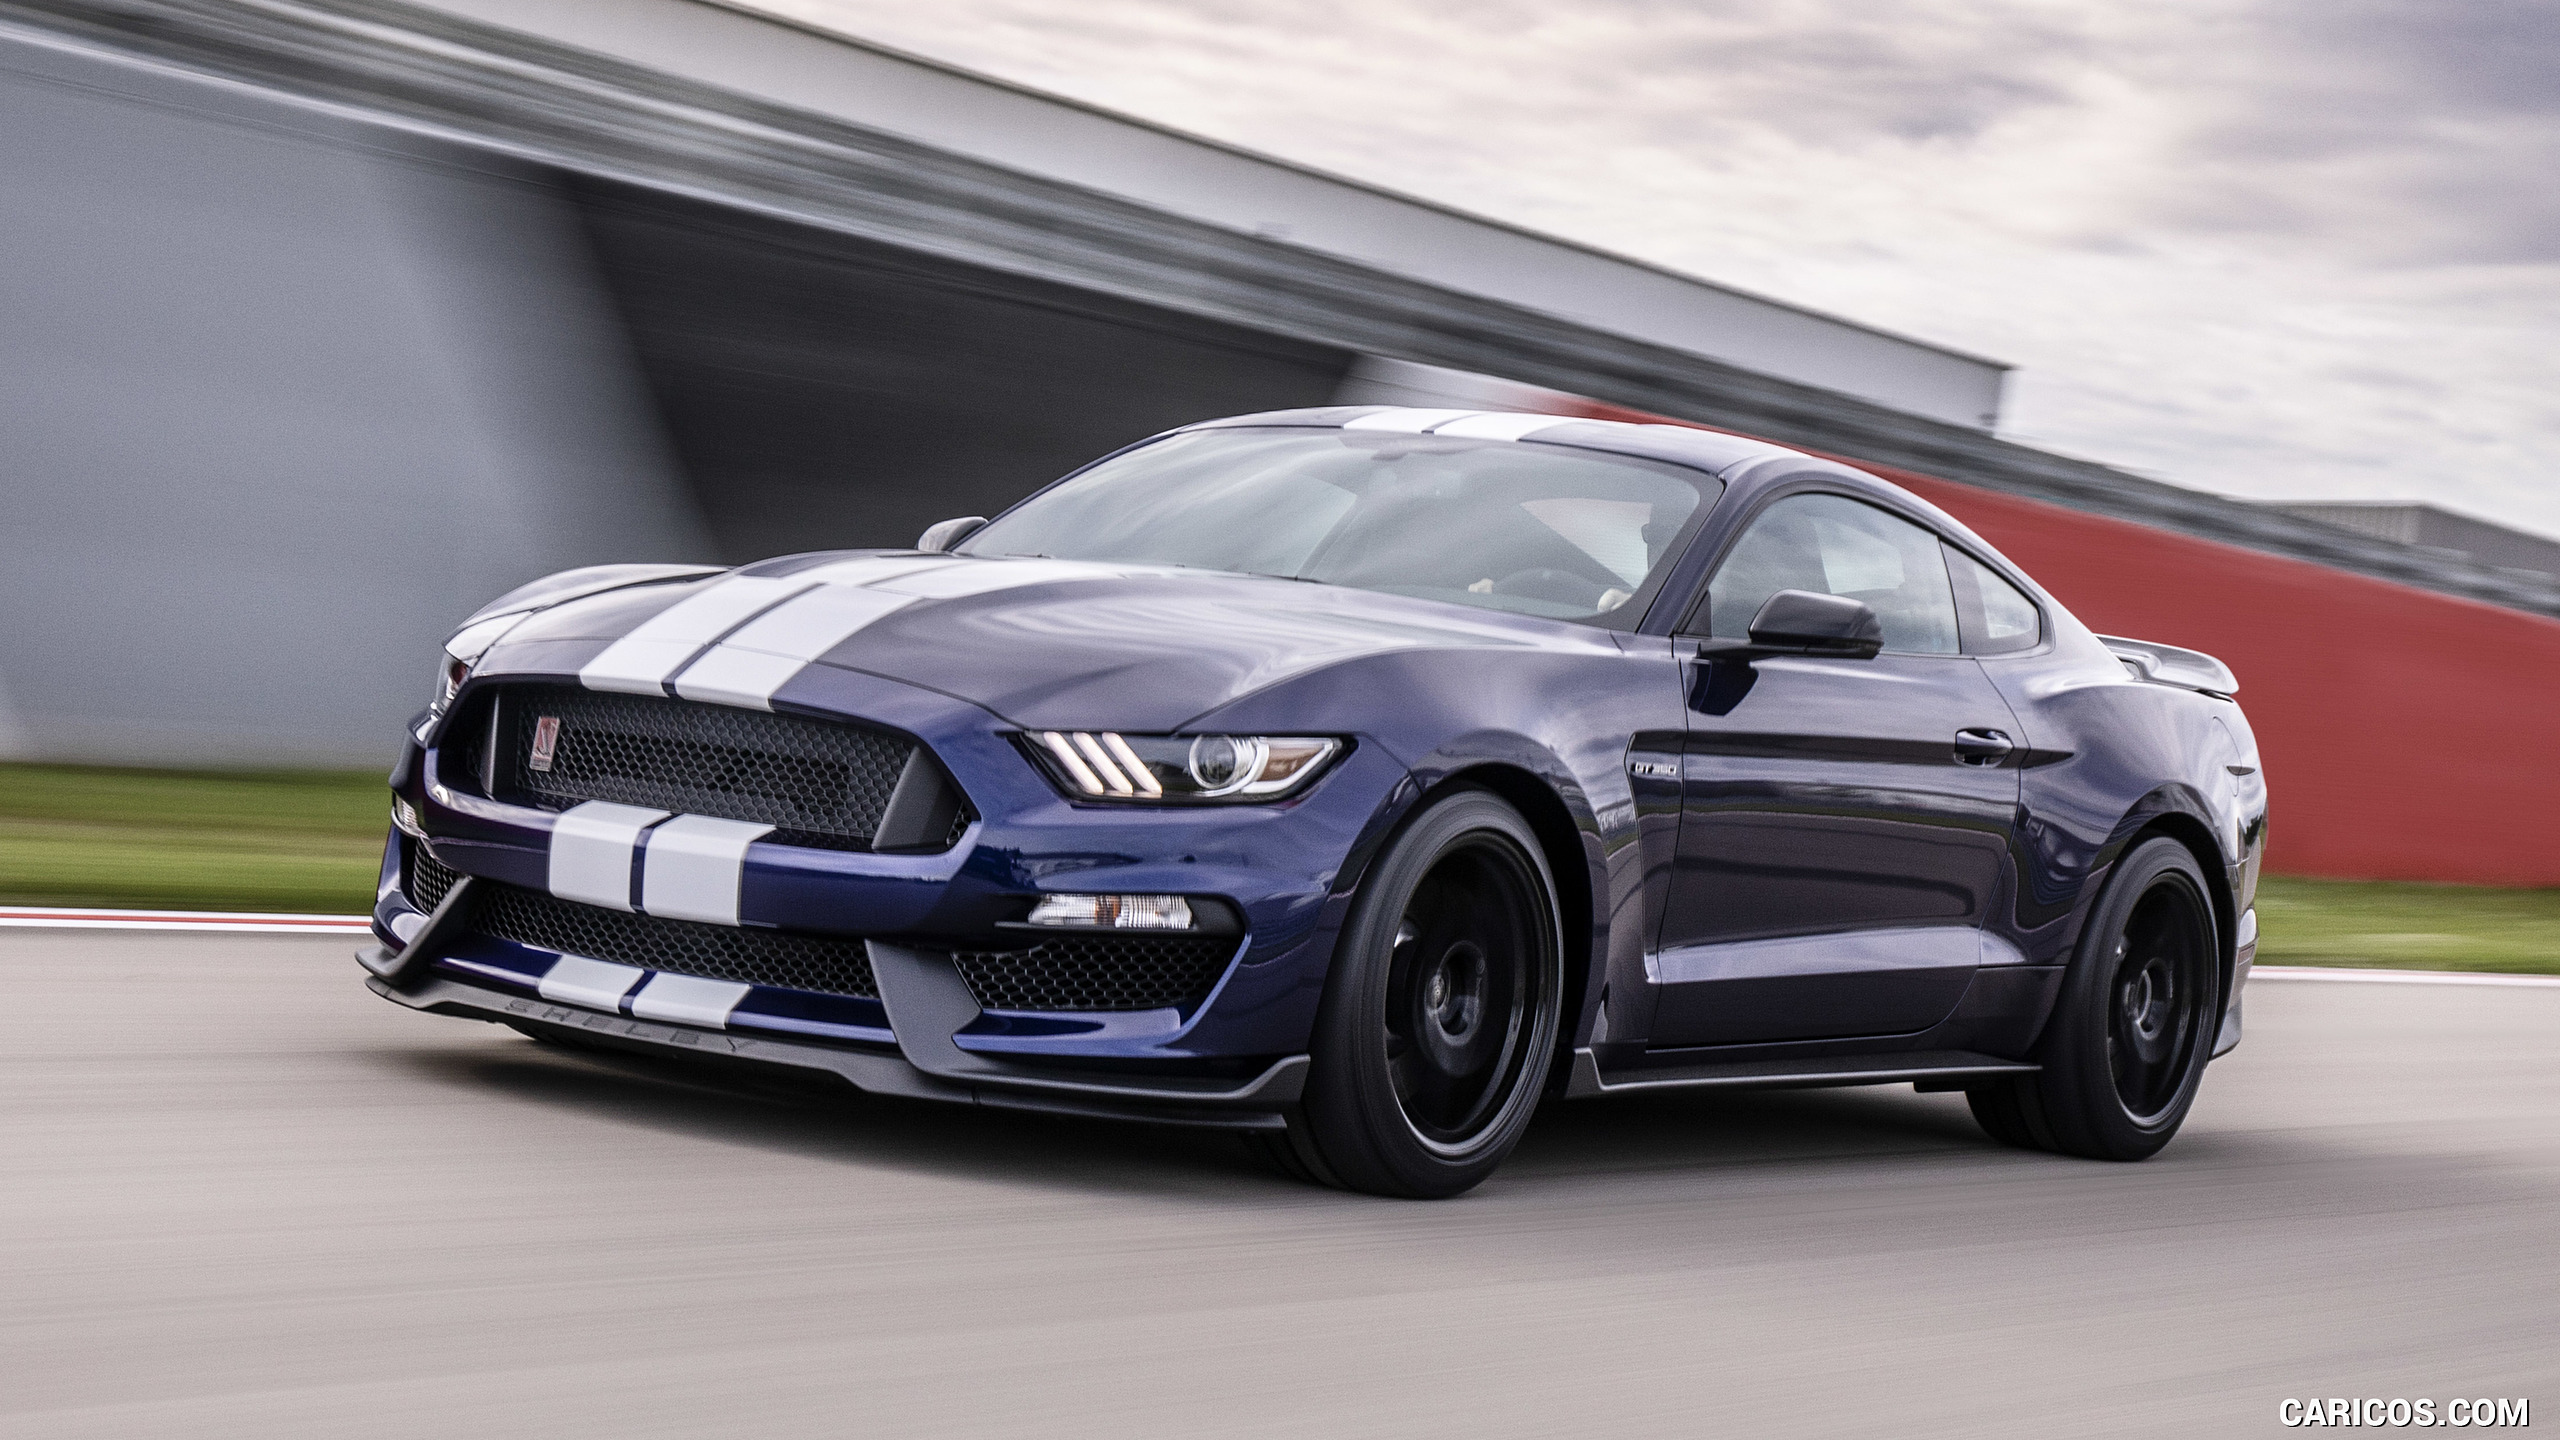 Ford Mustang Shelby Gt350 Front Three Quarter HD Wallpaper